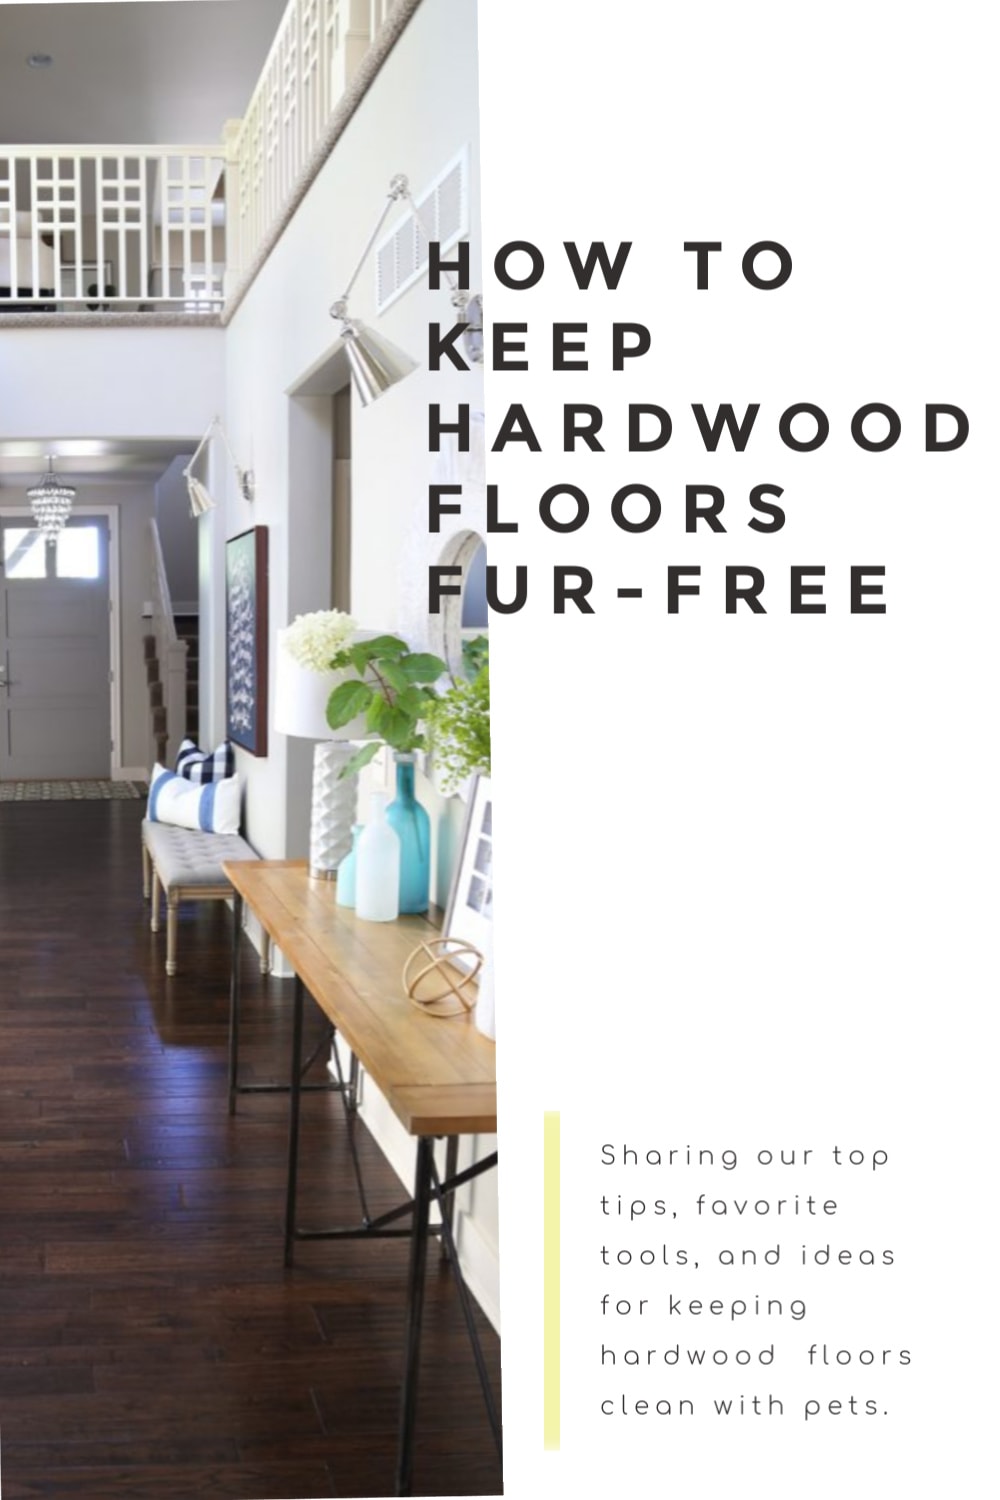 How To Have Fur Free Floors With Pets, How To Keep Hardwood Floors Clean